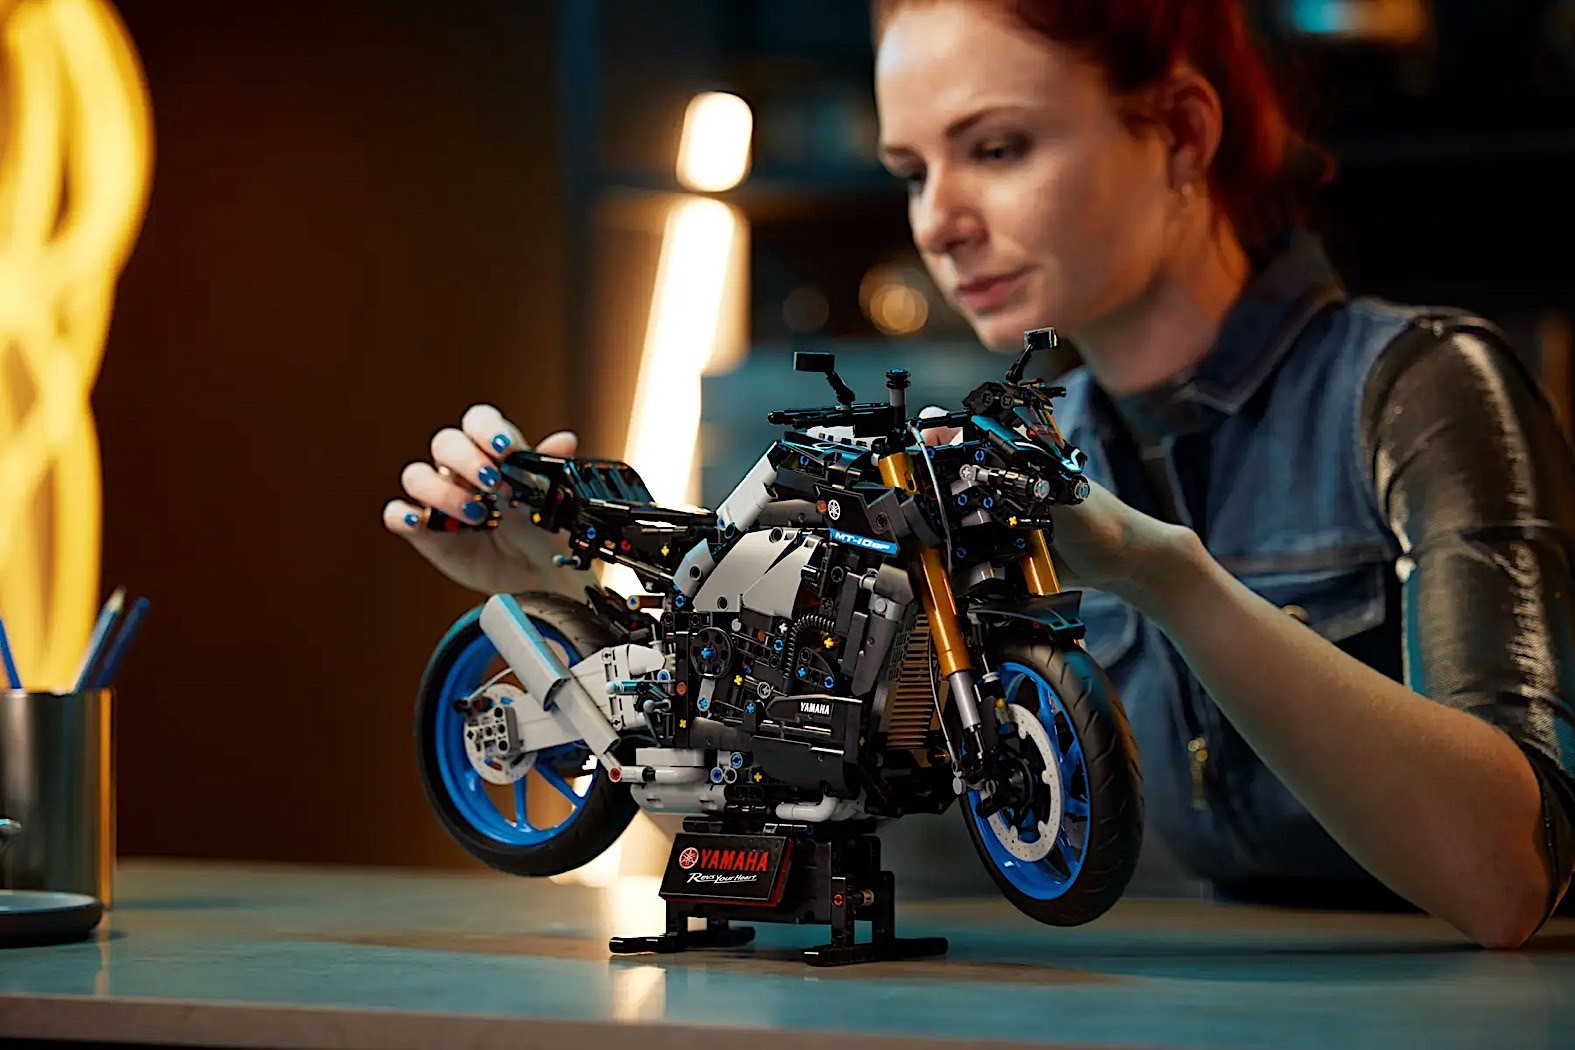 yamaha mt 10 sp comes together from 1478 lego pieces just as aggressive as the real deal 6